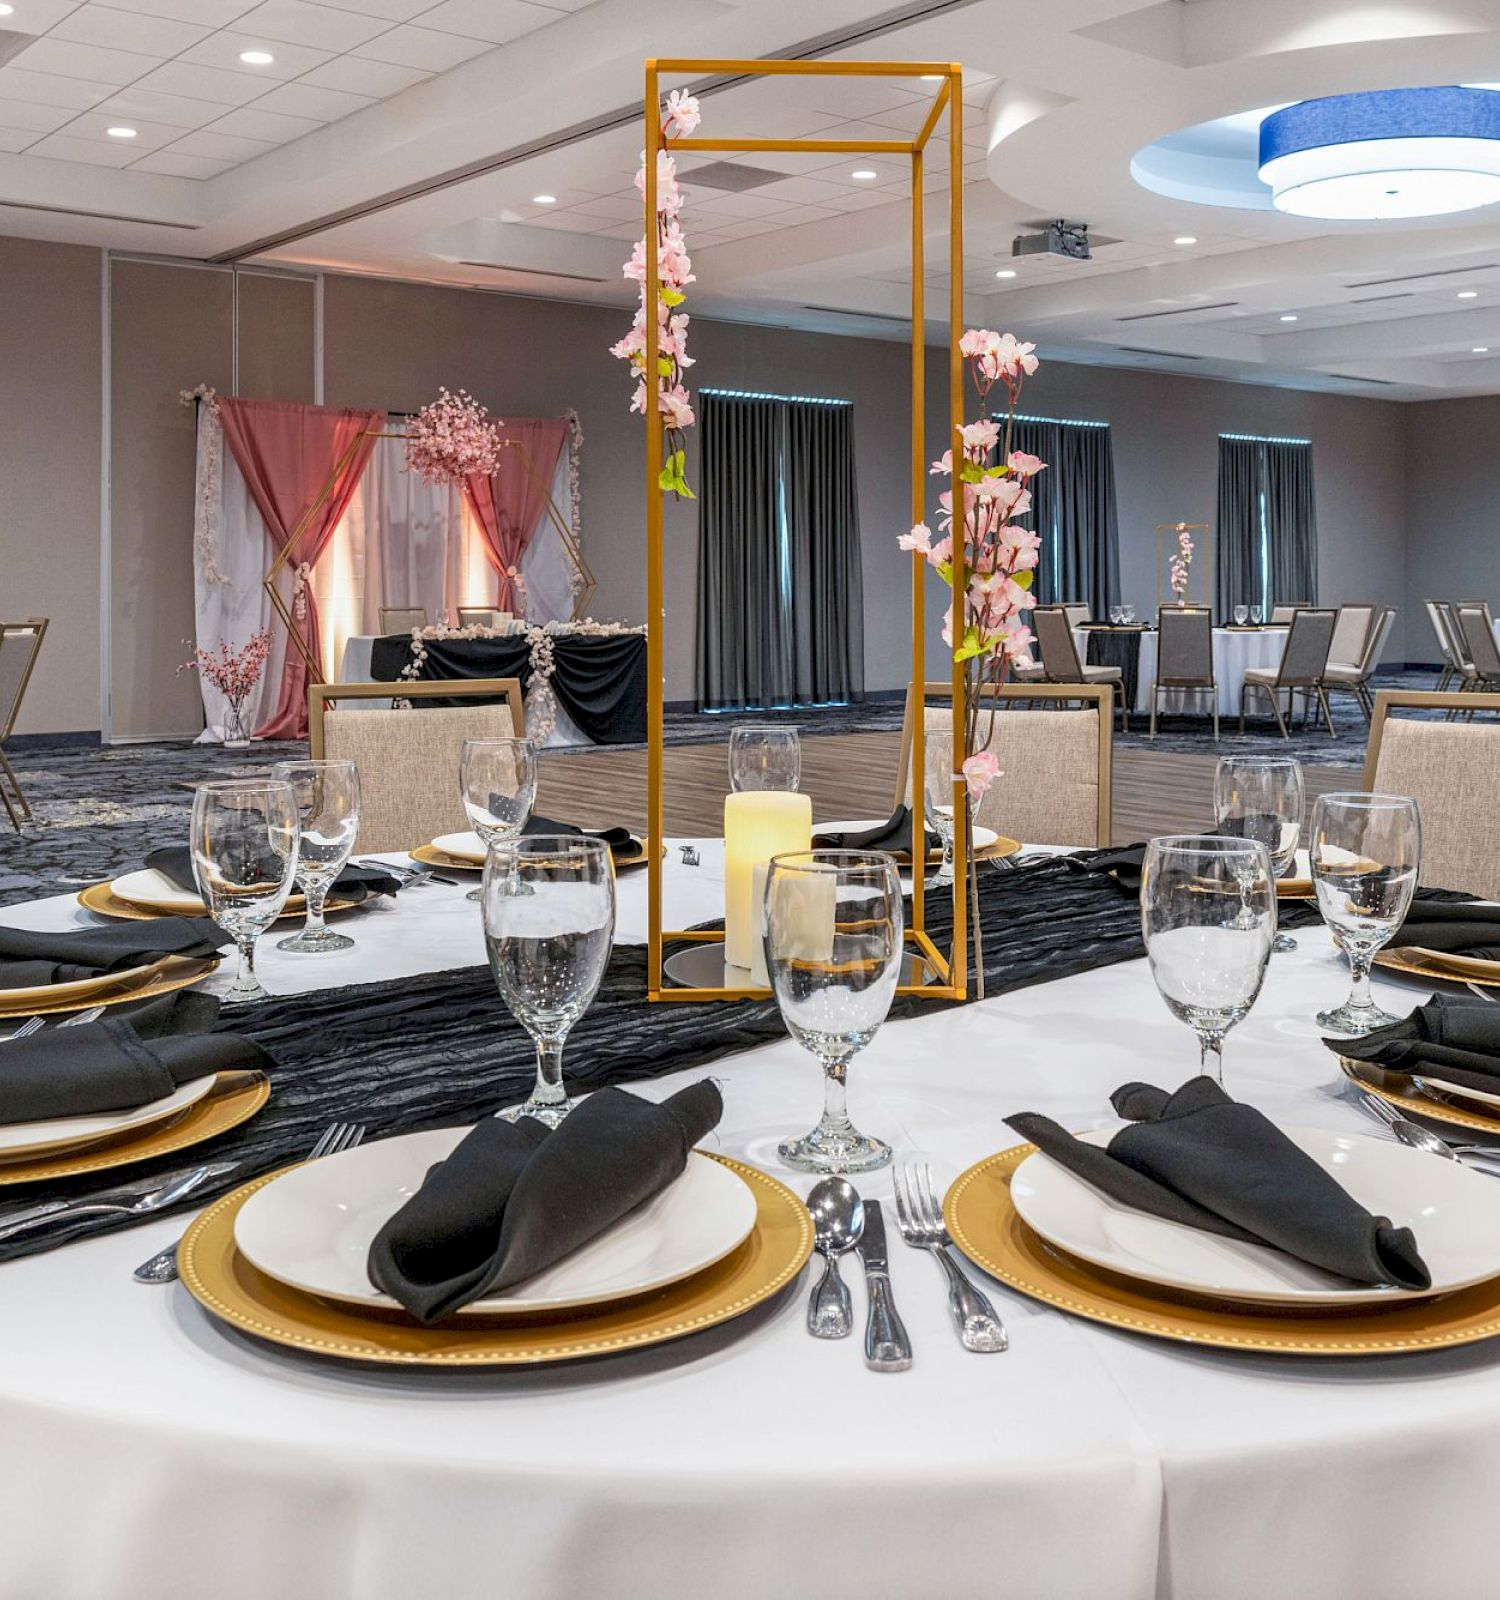 A round banquet table is set with plates, napkins, and glasses in an elegantly decorated room with other similarly arranged tables and modern lighting.